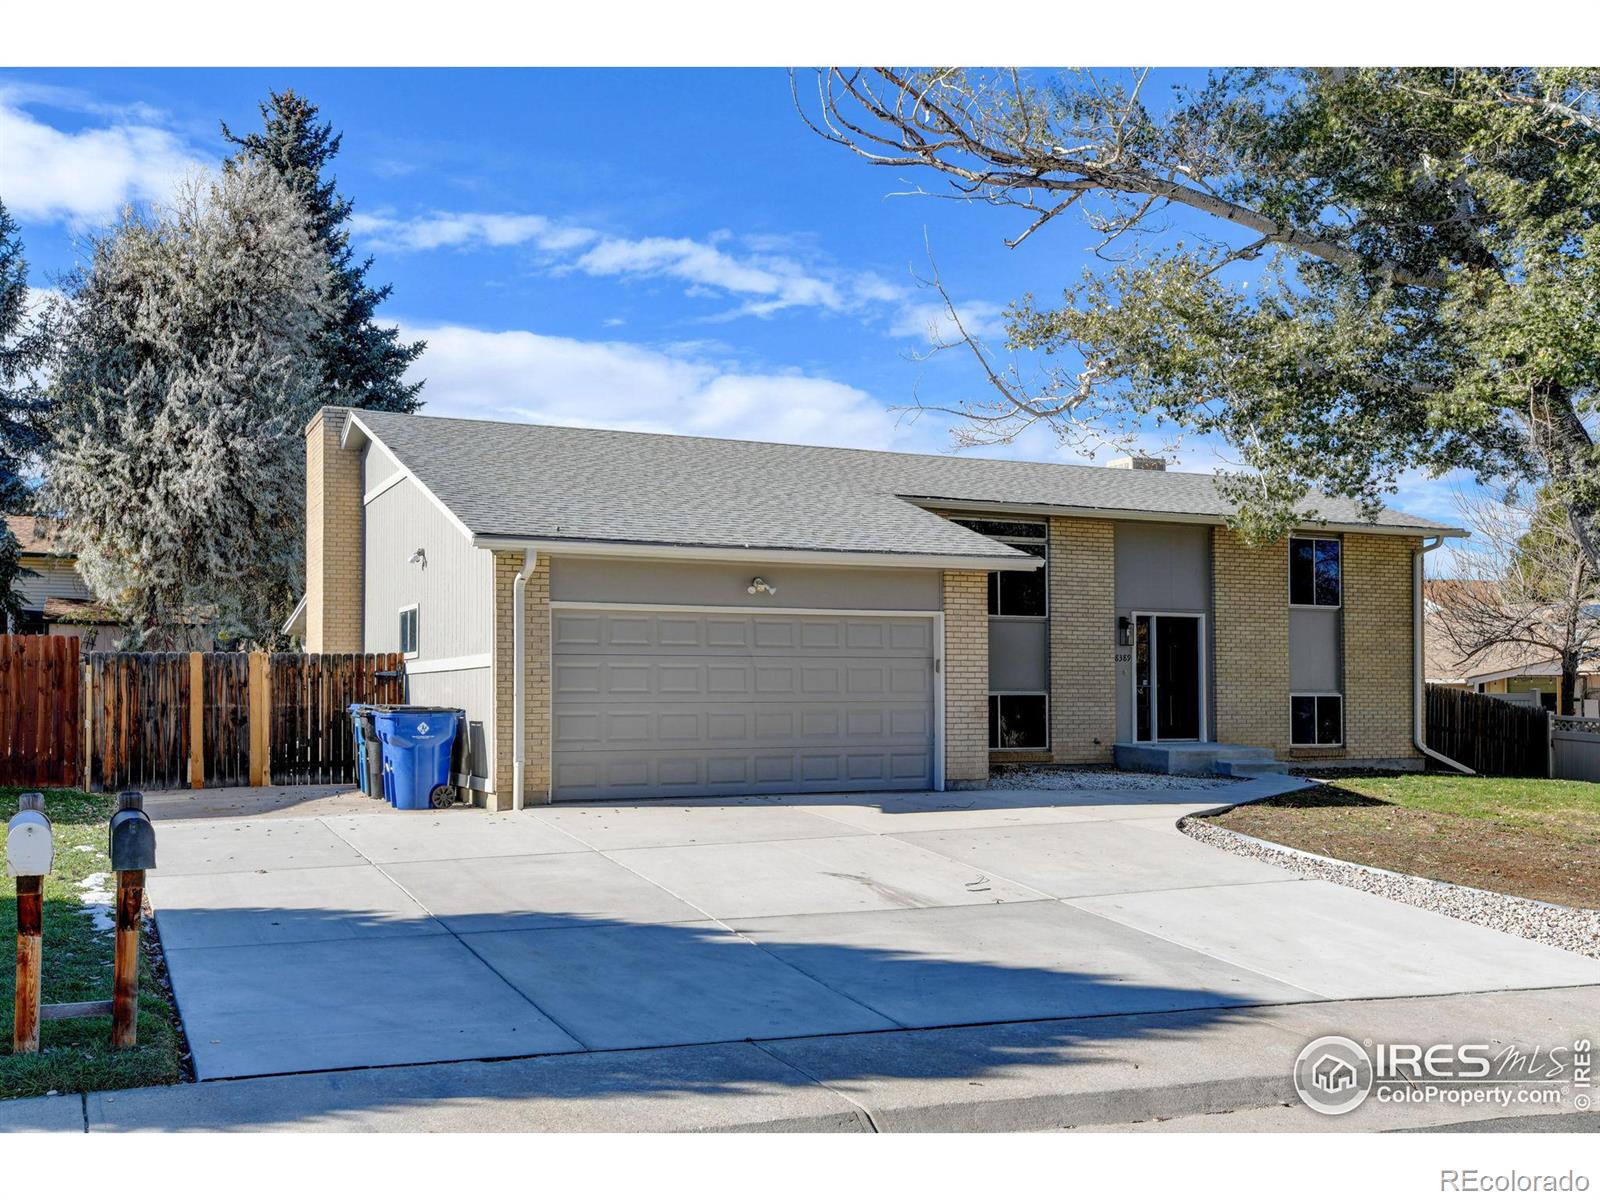 Report Image for 8389  Dudley Court,Arvada, Colorado